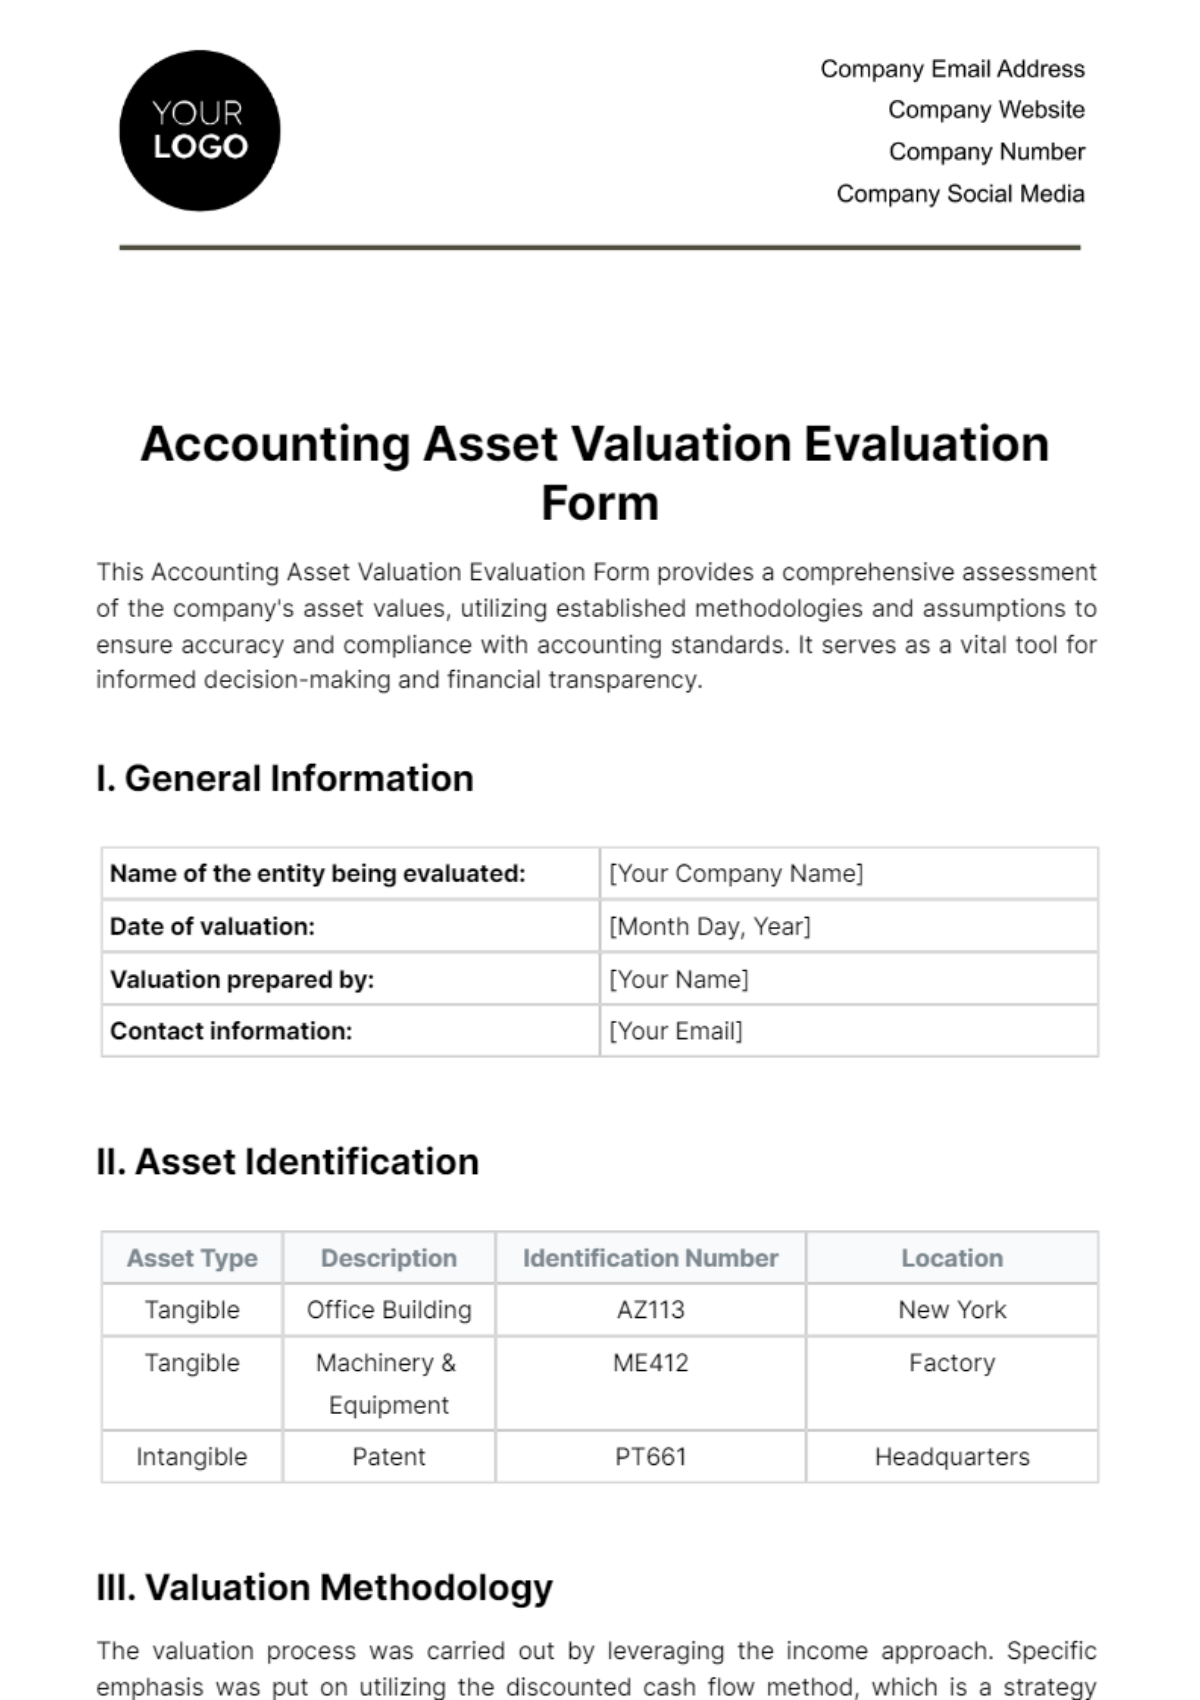 Free Accounting Asset Valuation Evaluation Form Template